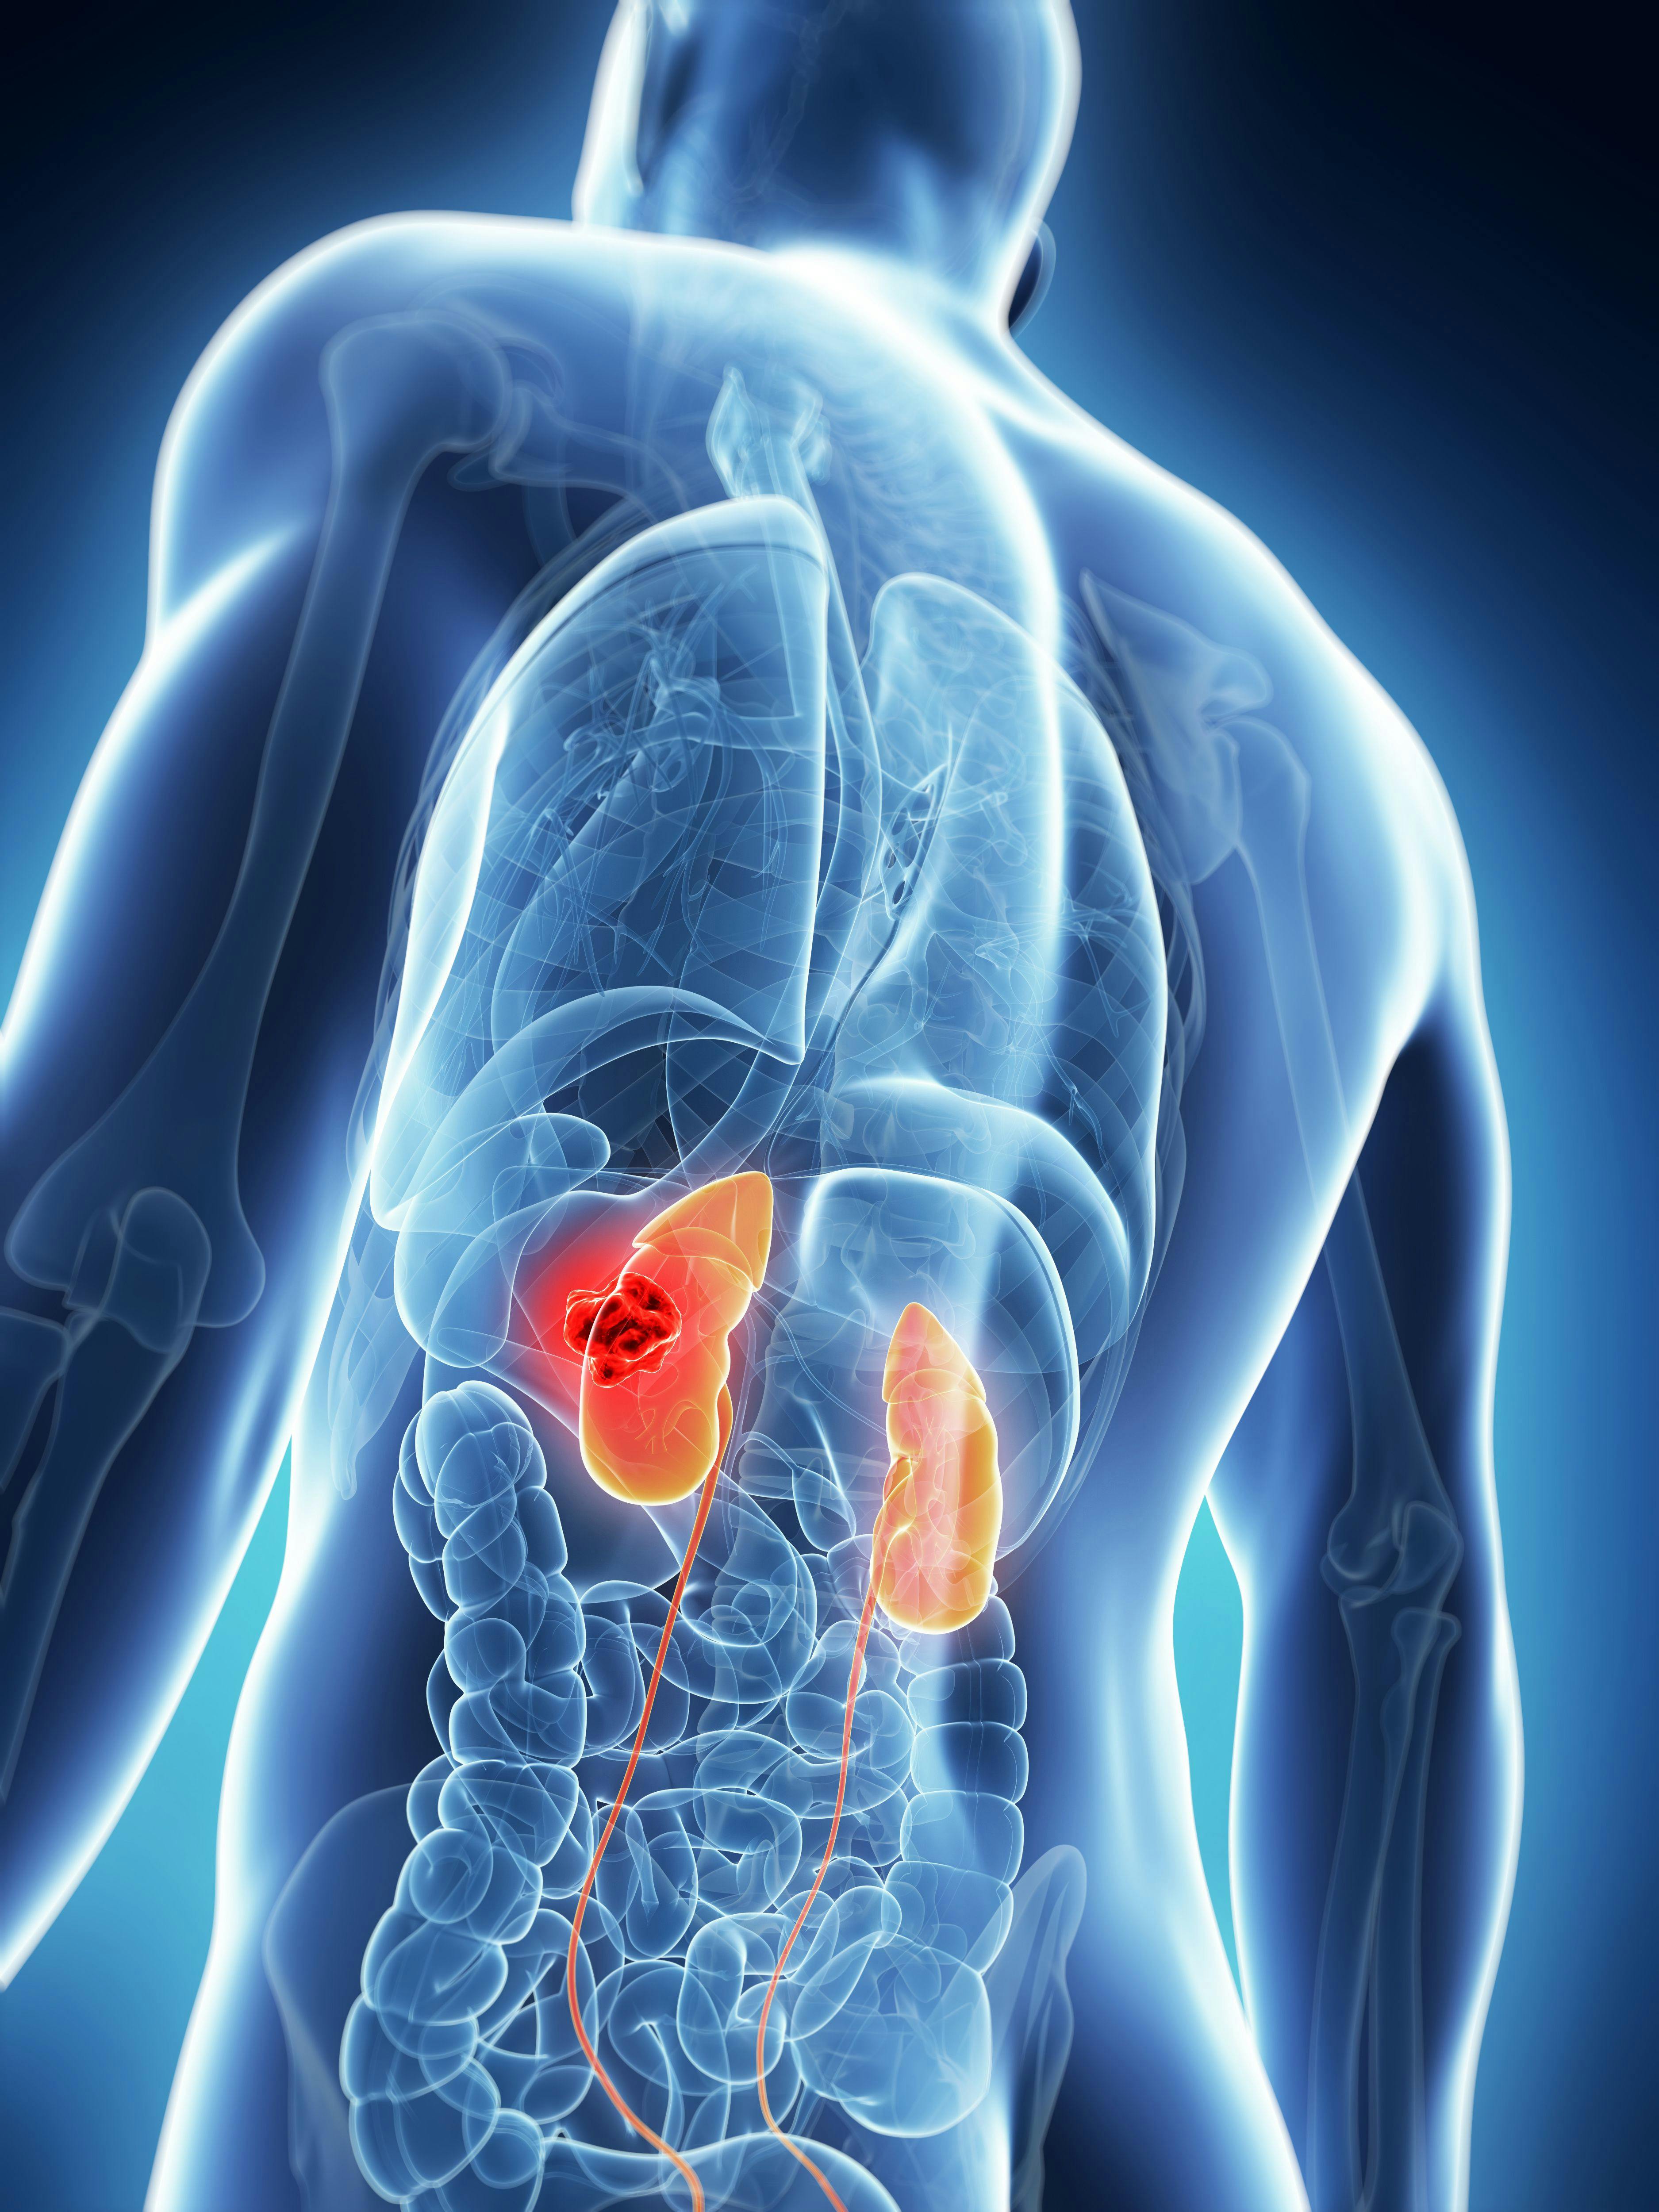 Cabozantinib Combo Shows Boost in Efficacy in Advanced Kidney Cancer Subgroups